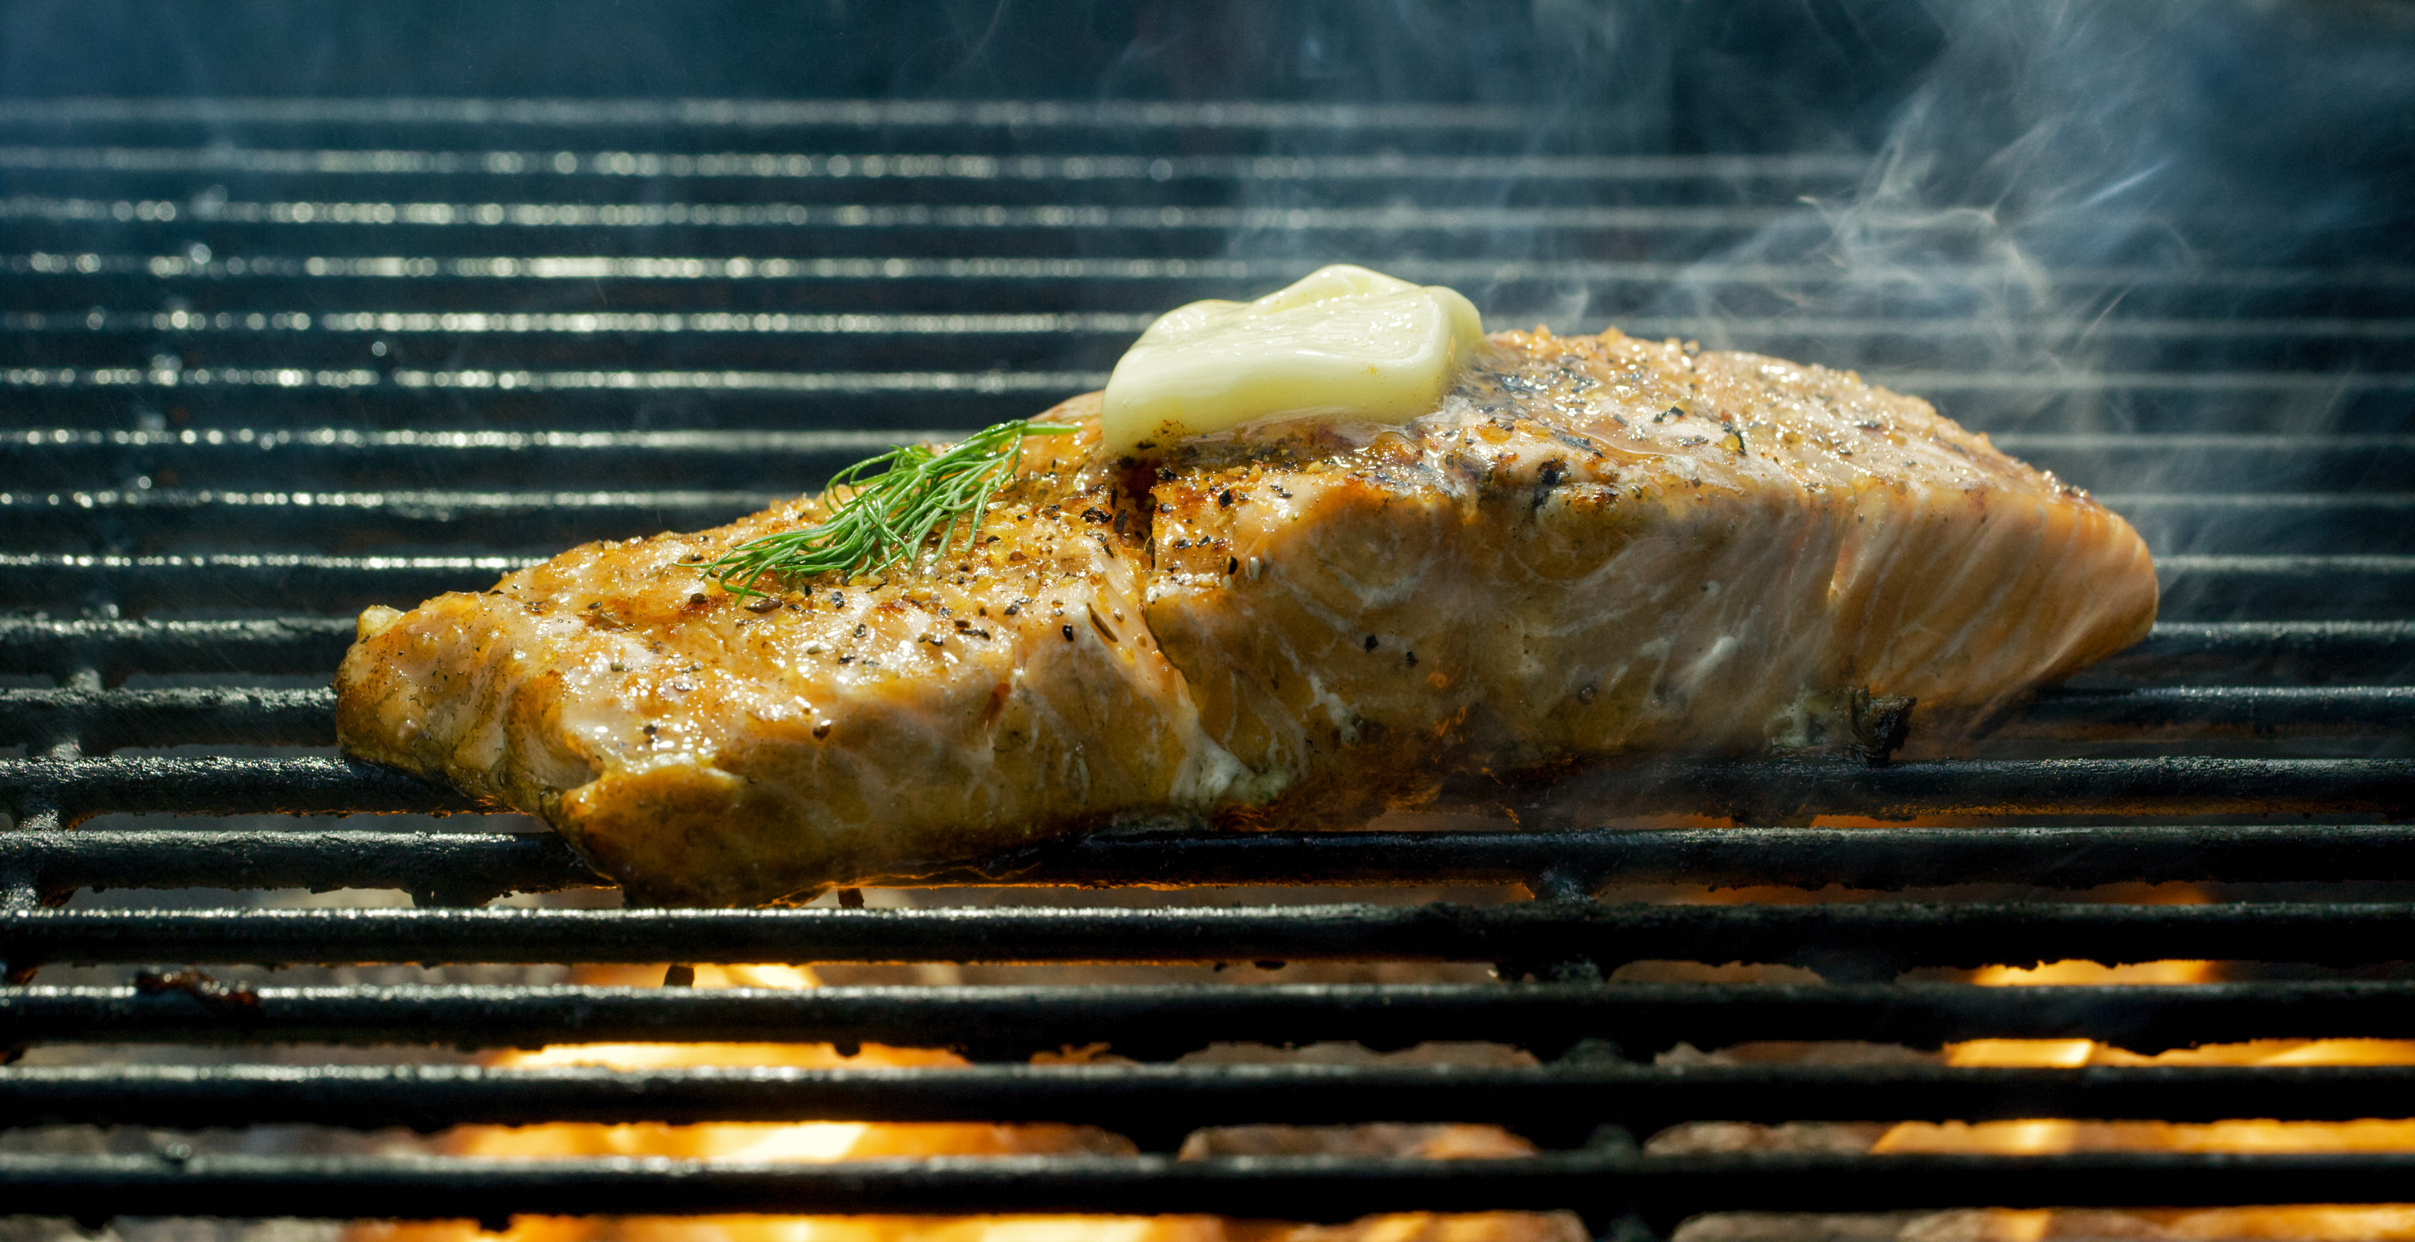 Grilled salmon with a slice of butter and dill on top, steam rising, cooking on a grill